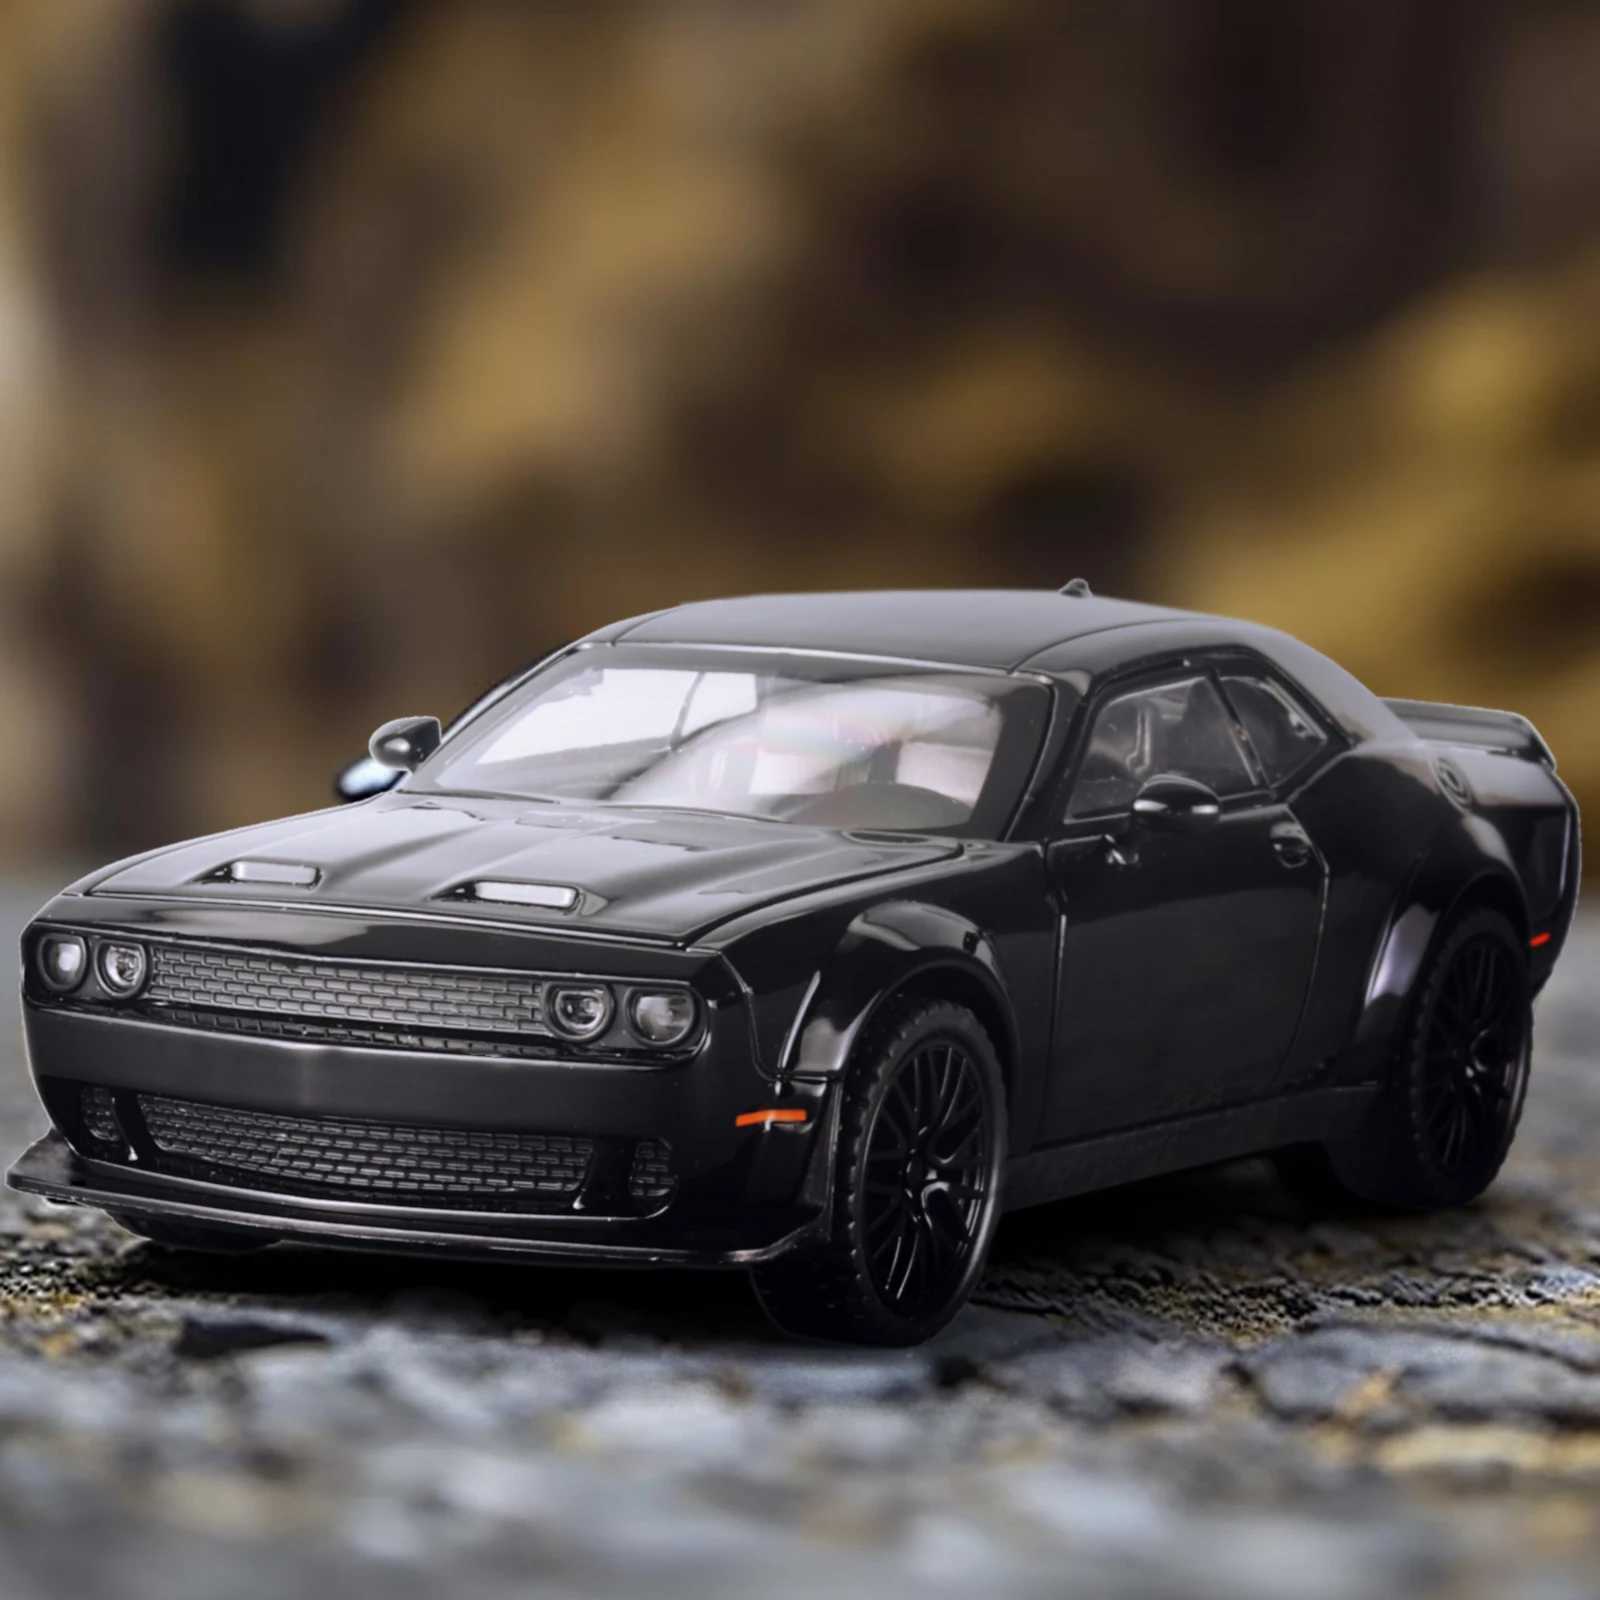 MODEAU DICAST CARS 1/32 HELLCAT REDEYE ALLIAGE DI-MUST MUSCLE MODEAU SON AND COMMOCE DE TOUEUX CHILRENS LEIL